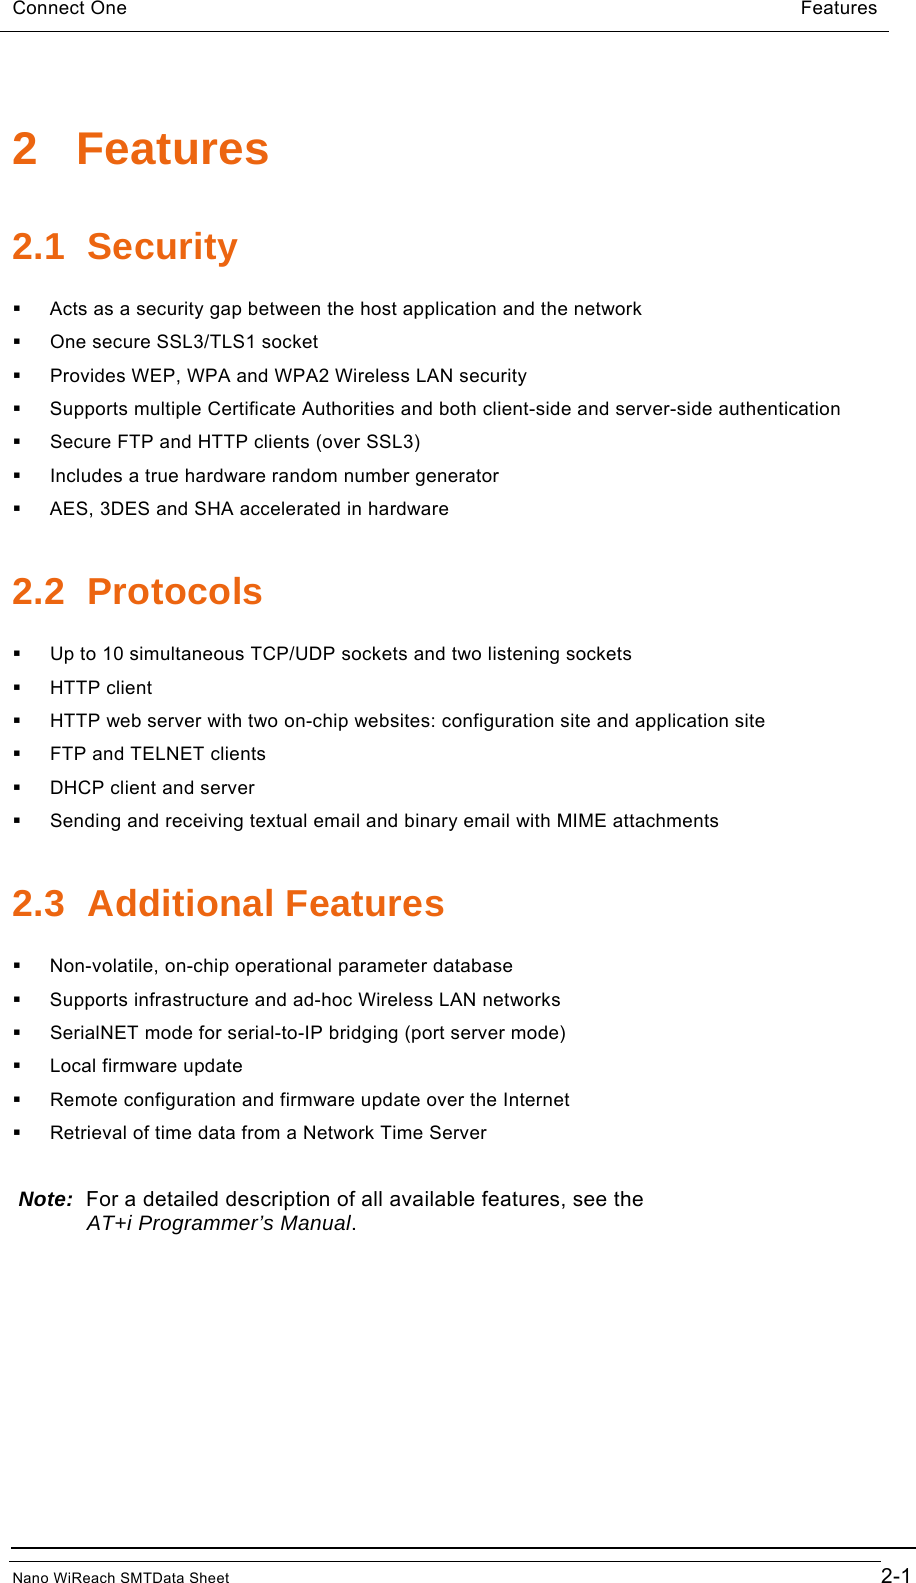 Connect One                                                        Features  2 Features 2.1 Security   Acts as a security gap between the host application and the network   One secure SSL3/TLS1 socket   Provides WEP, WPA and WPA2 Wireless LAN security   Supports multiple Certificate Authorities and both client-side and server-side authentication   Secure FTP and HTTP clients (over SSL3)   Includes a true hardware random number generator   AES, 3DES and SHA accelerated in hardware 2.2 Protocols   Up to 10 simultaneous TCP/UDP sockets and two listening sockets  HTTP client   HTTP web server with two on-chip websites: configuration site and application site   FTP and TELNET clients   DHCP client and server   Sending and receiving textual email and binary email with MIME attachments 2.3 Additional Features   Non-volatile, on-chip operational parameter database   Supports infrastructure and ad-hoc Wireless LAN networks   SerialNET mode for serial-to-IP bridging (port server mode)   Local firmware update   Remote configuration and firmware update over the Internet   Retrieval of time data from a Network Time Server  Note:  For a detailed description of all available features, see the       AT+i Programmer’s Manual.  Nano WiReach SMTData Sheet                                        2-1 